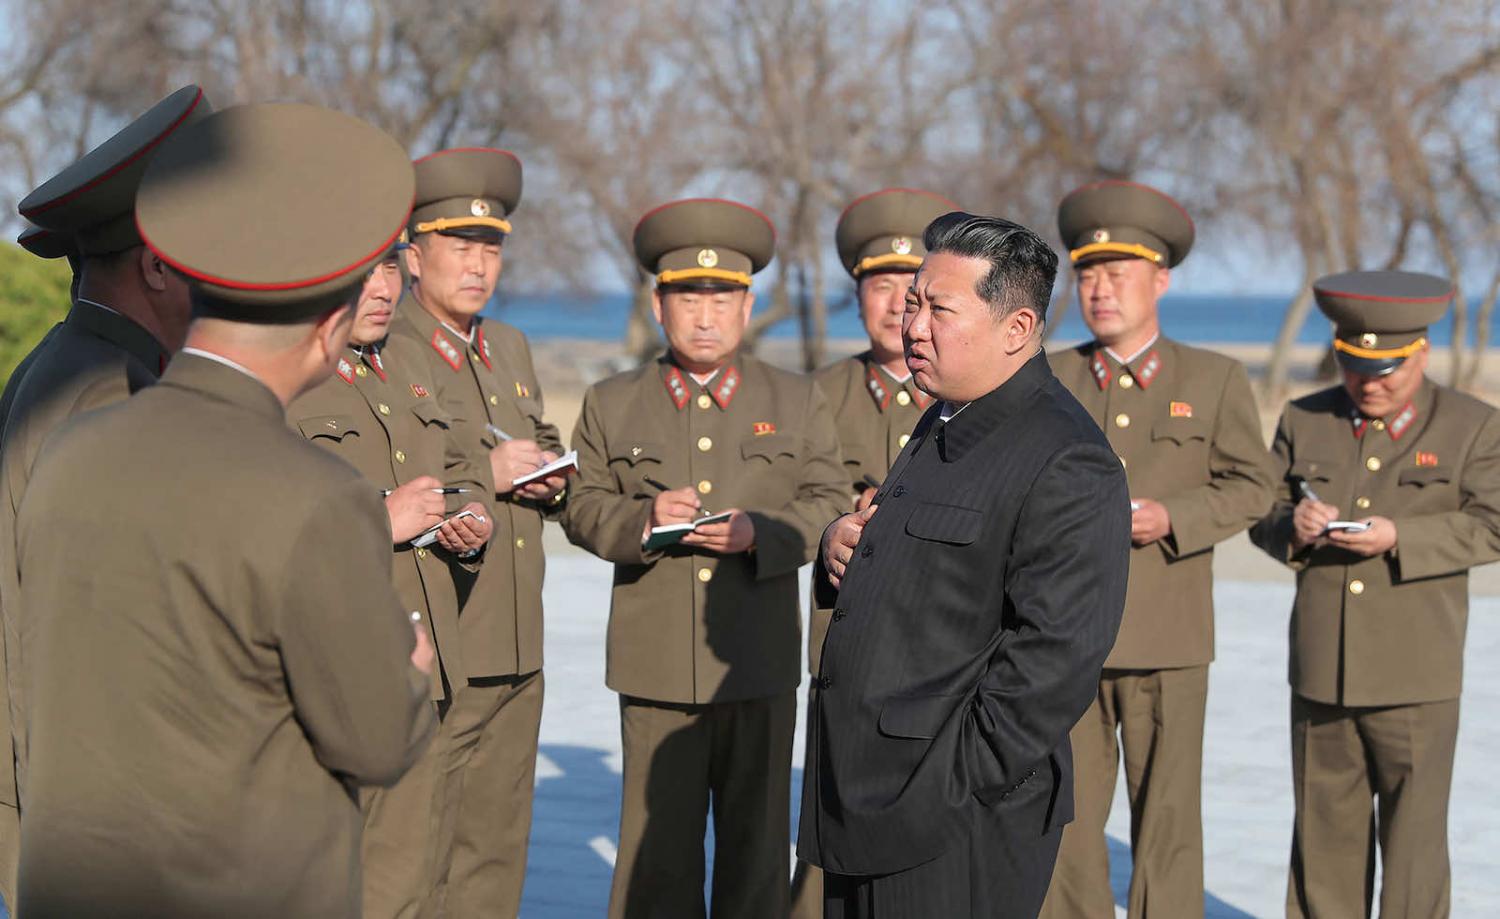 North Korea’s Kim Jong-un and his generals in a photo released in April (KCNA/AFP via Getty Images)